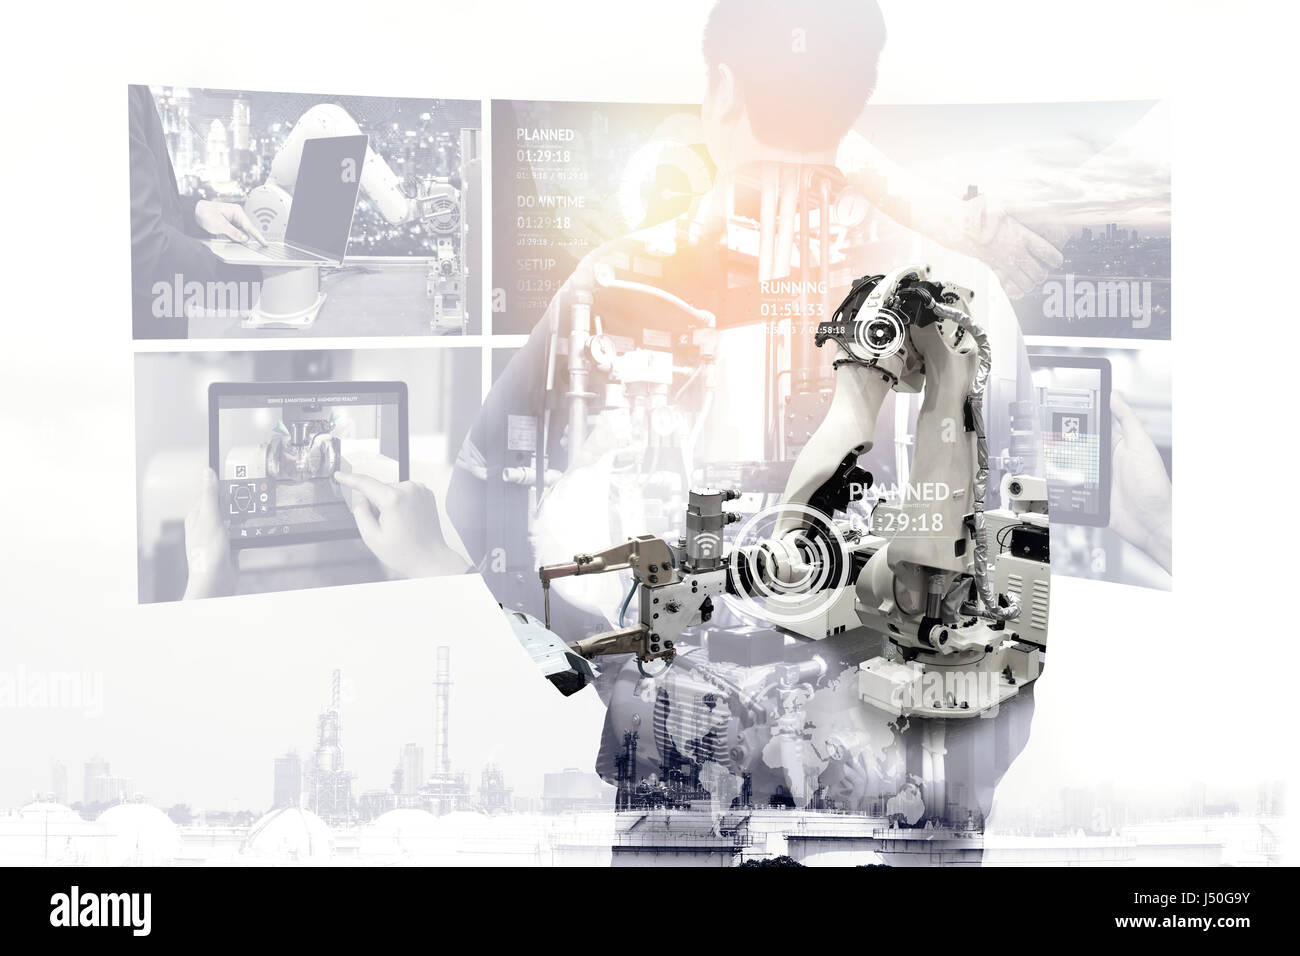 Industrial internet of things , disruption technology and industry 4.0 concept. Double exposure of automate wireless Robot arm and business man monito Stock Photo